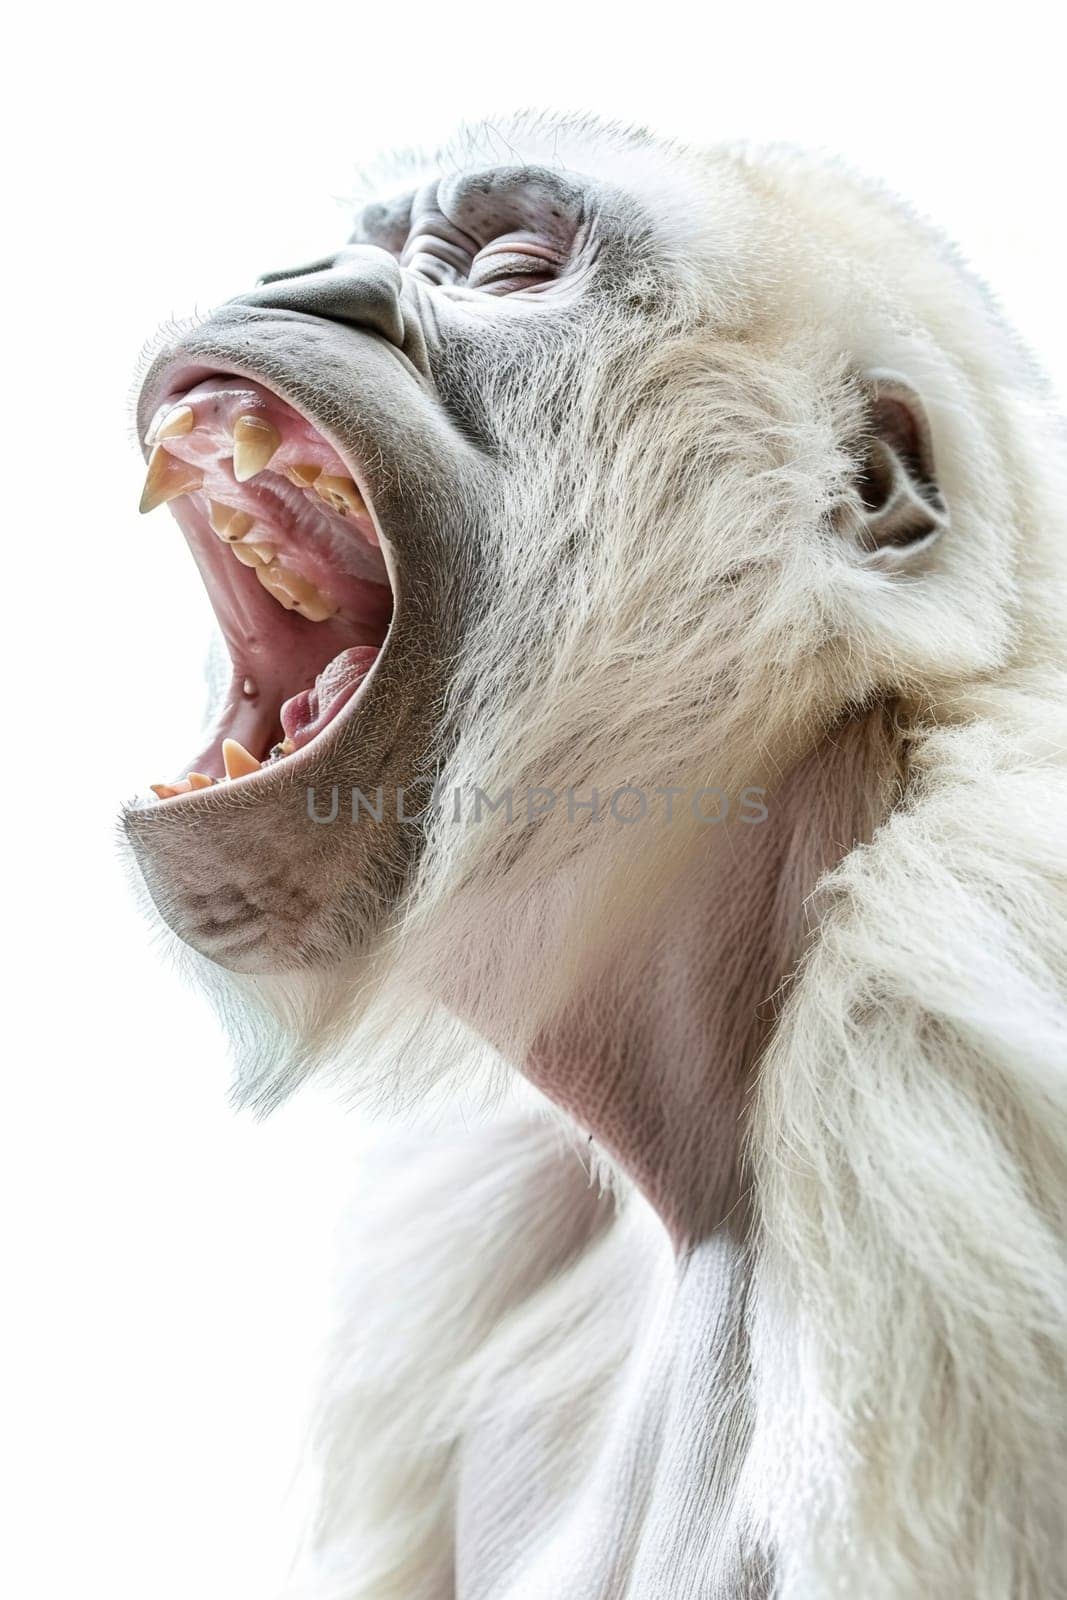 A white screaming monkey highlighted on a white background.